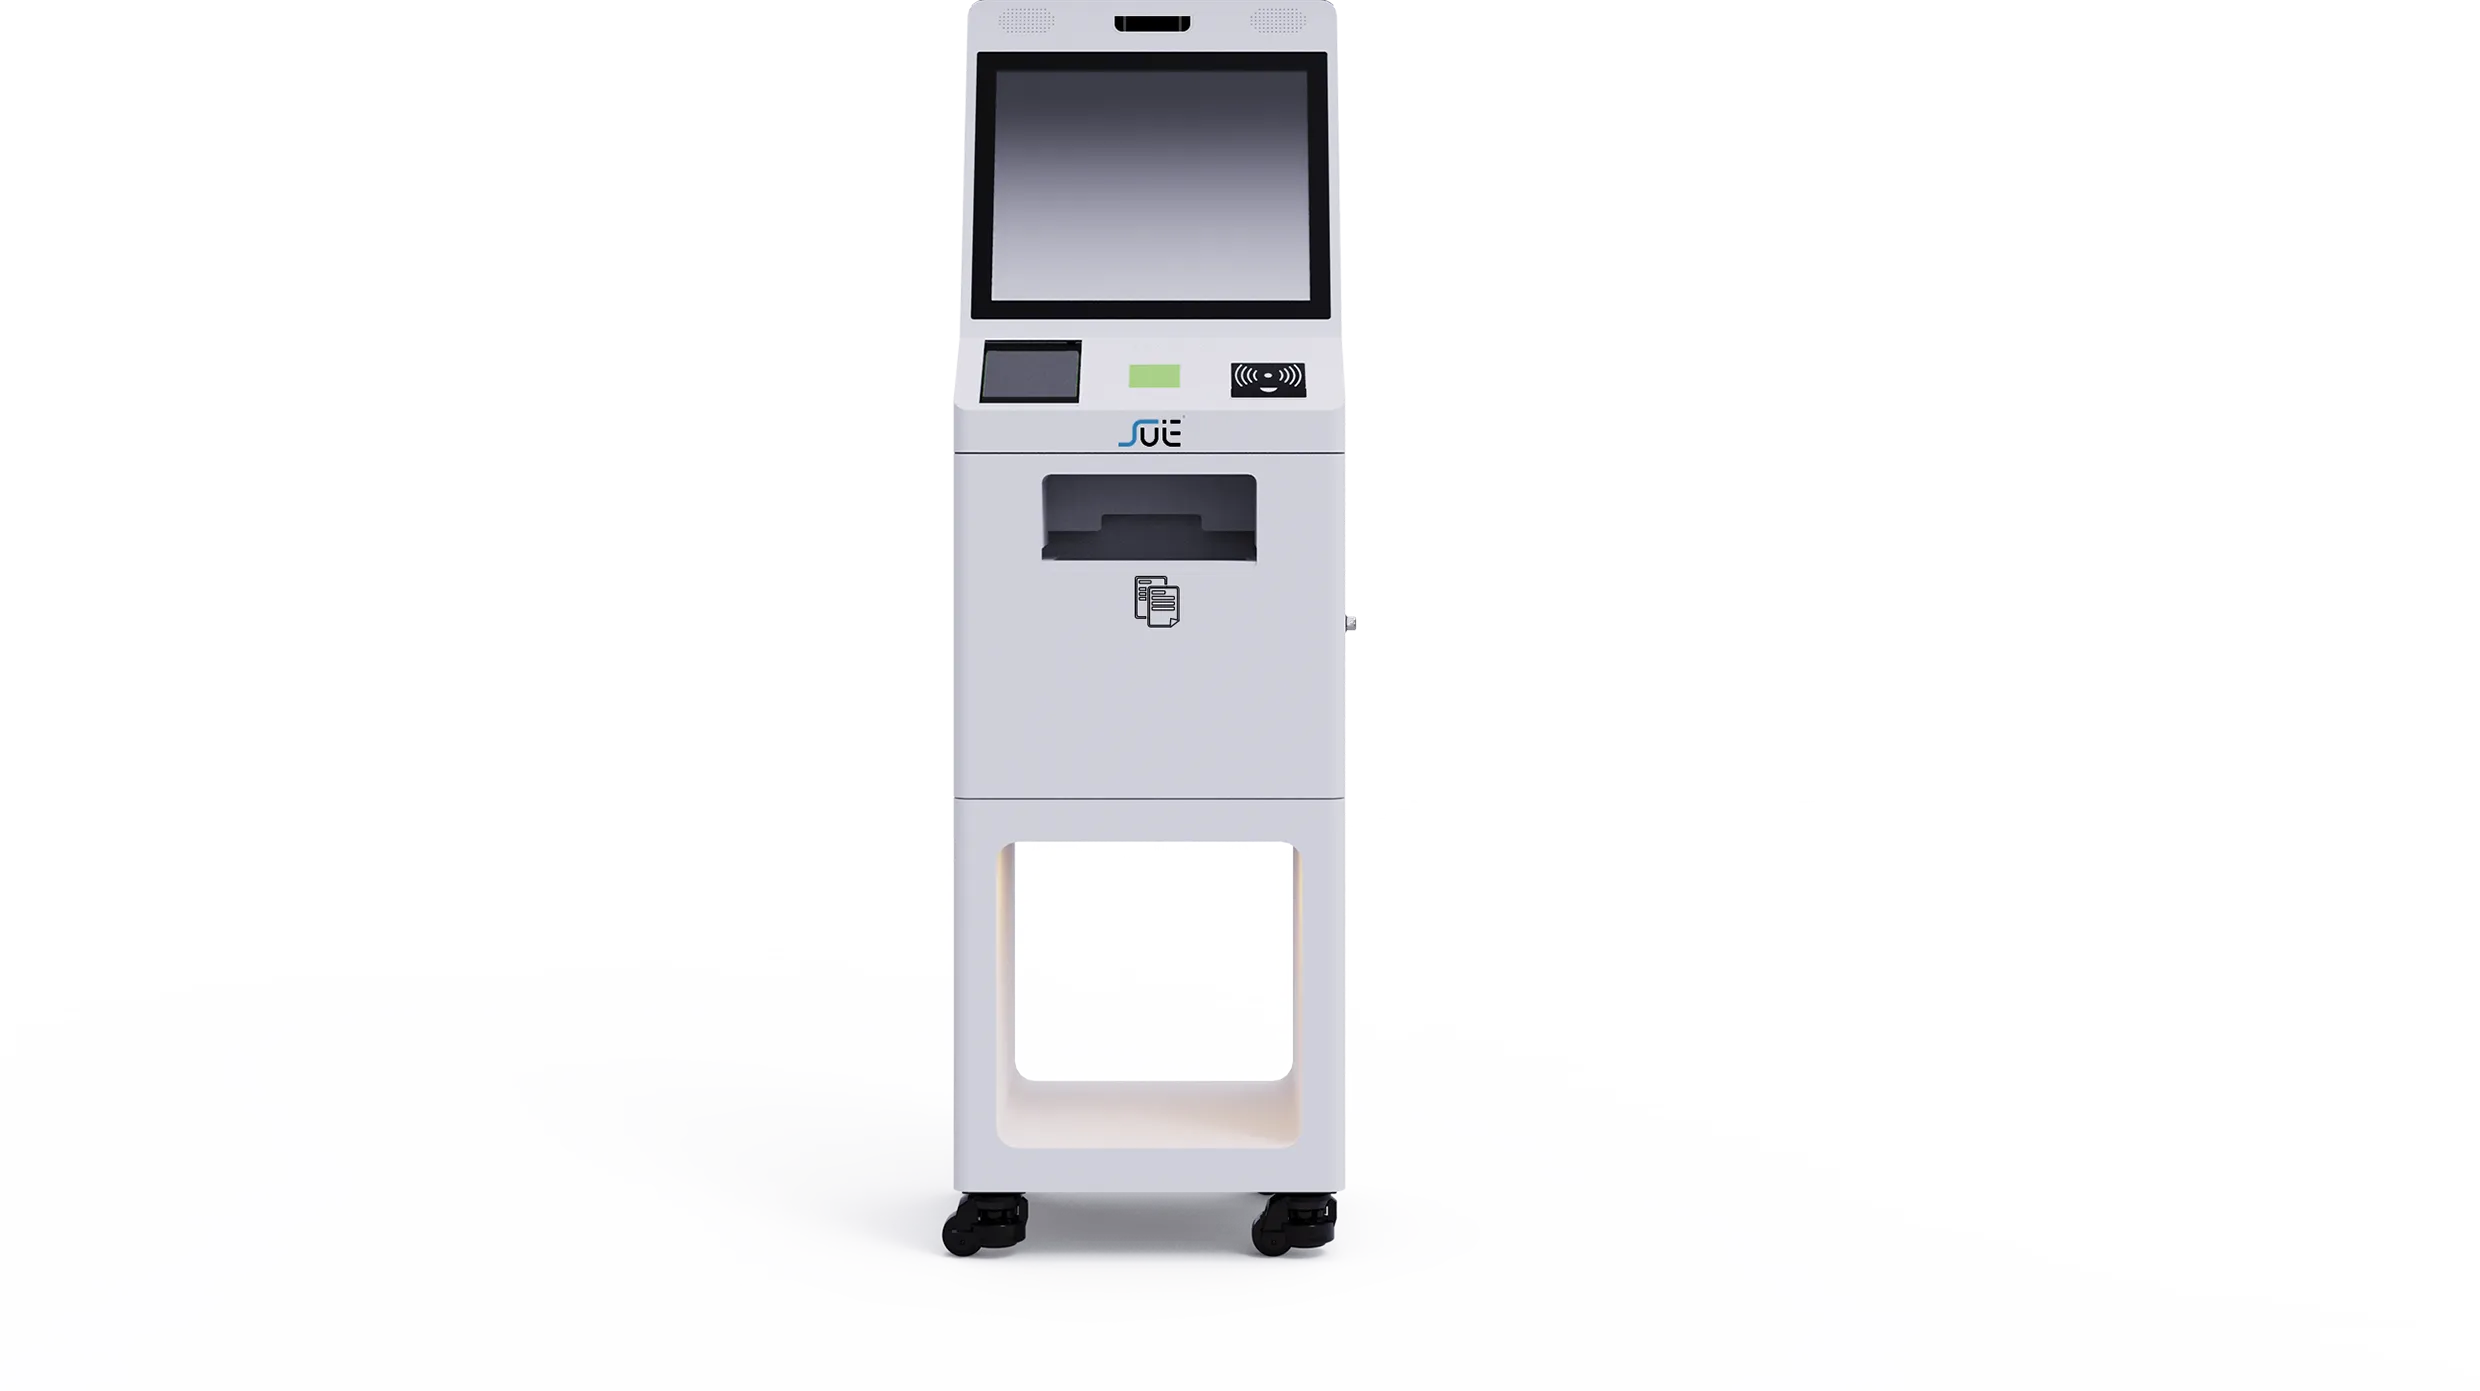 Revolutionize Your Document Printing with Our State-of-the-Art Self-Service Kiosks